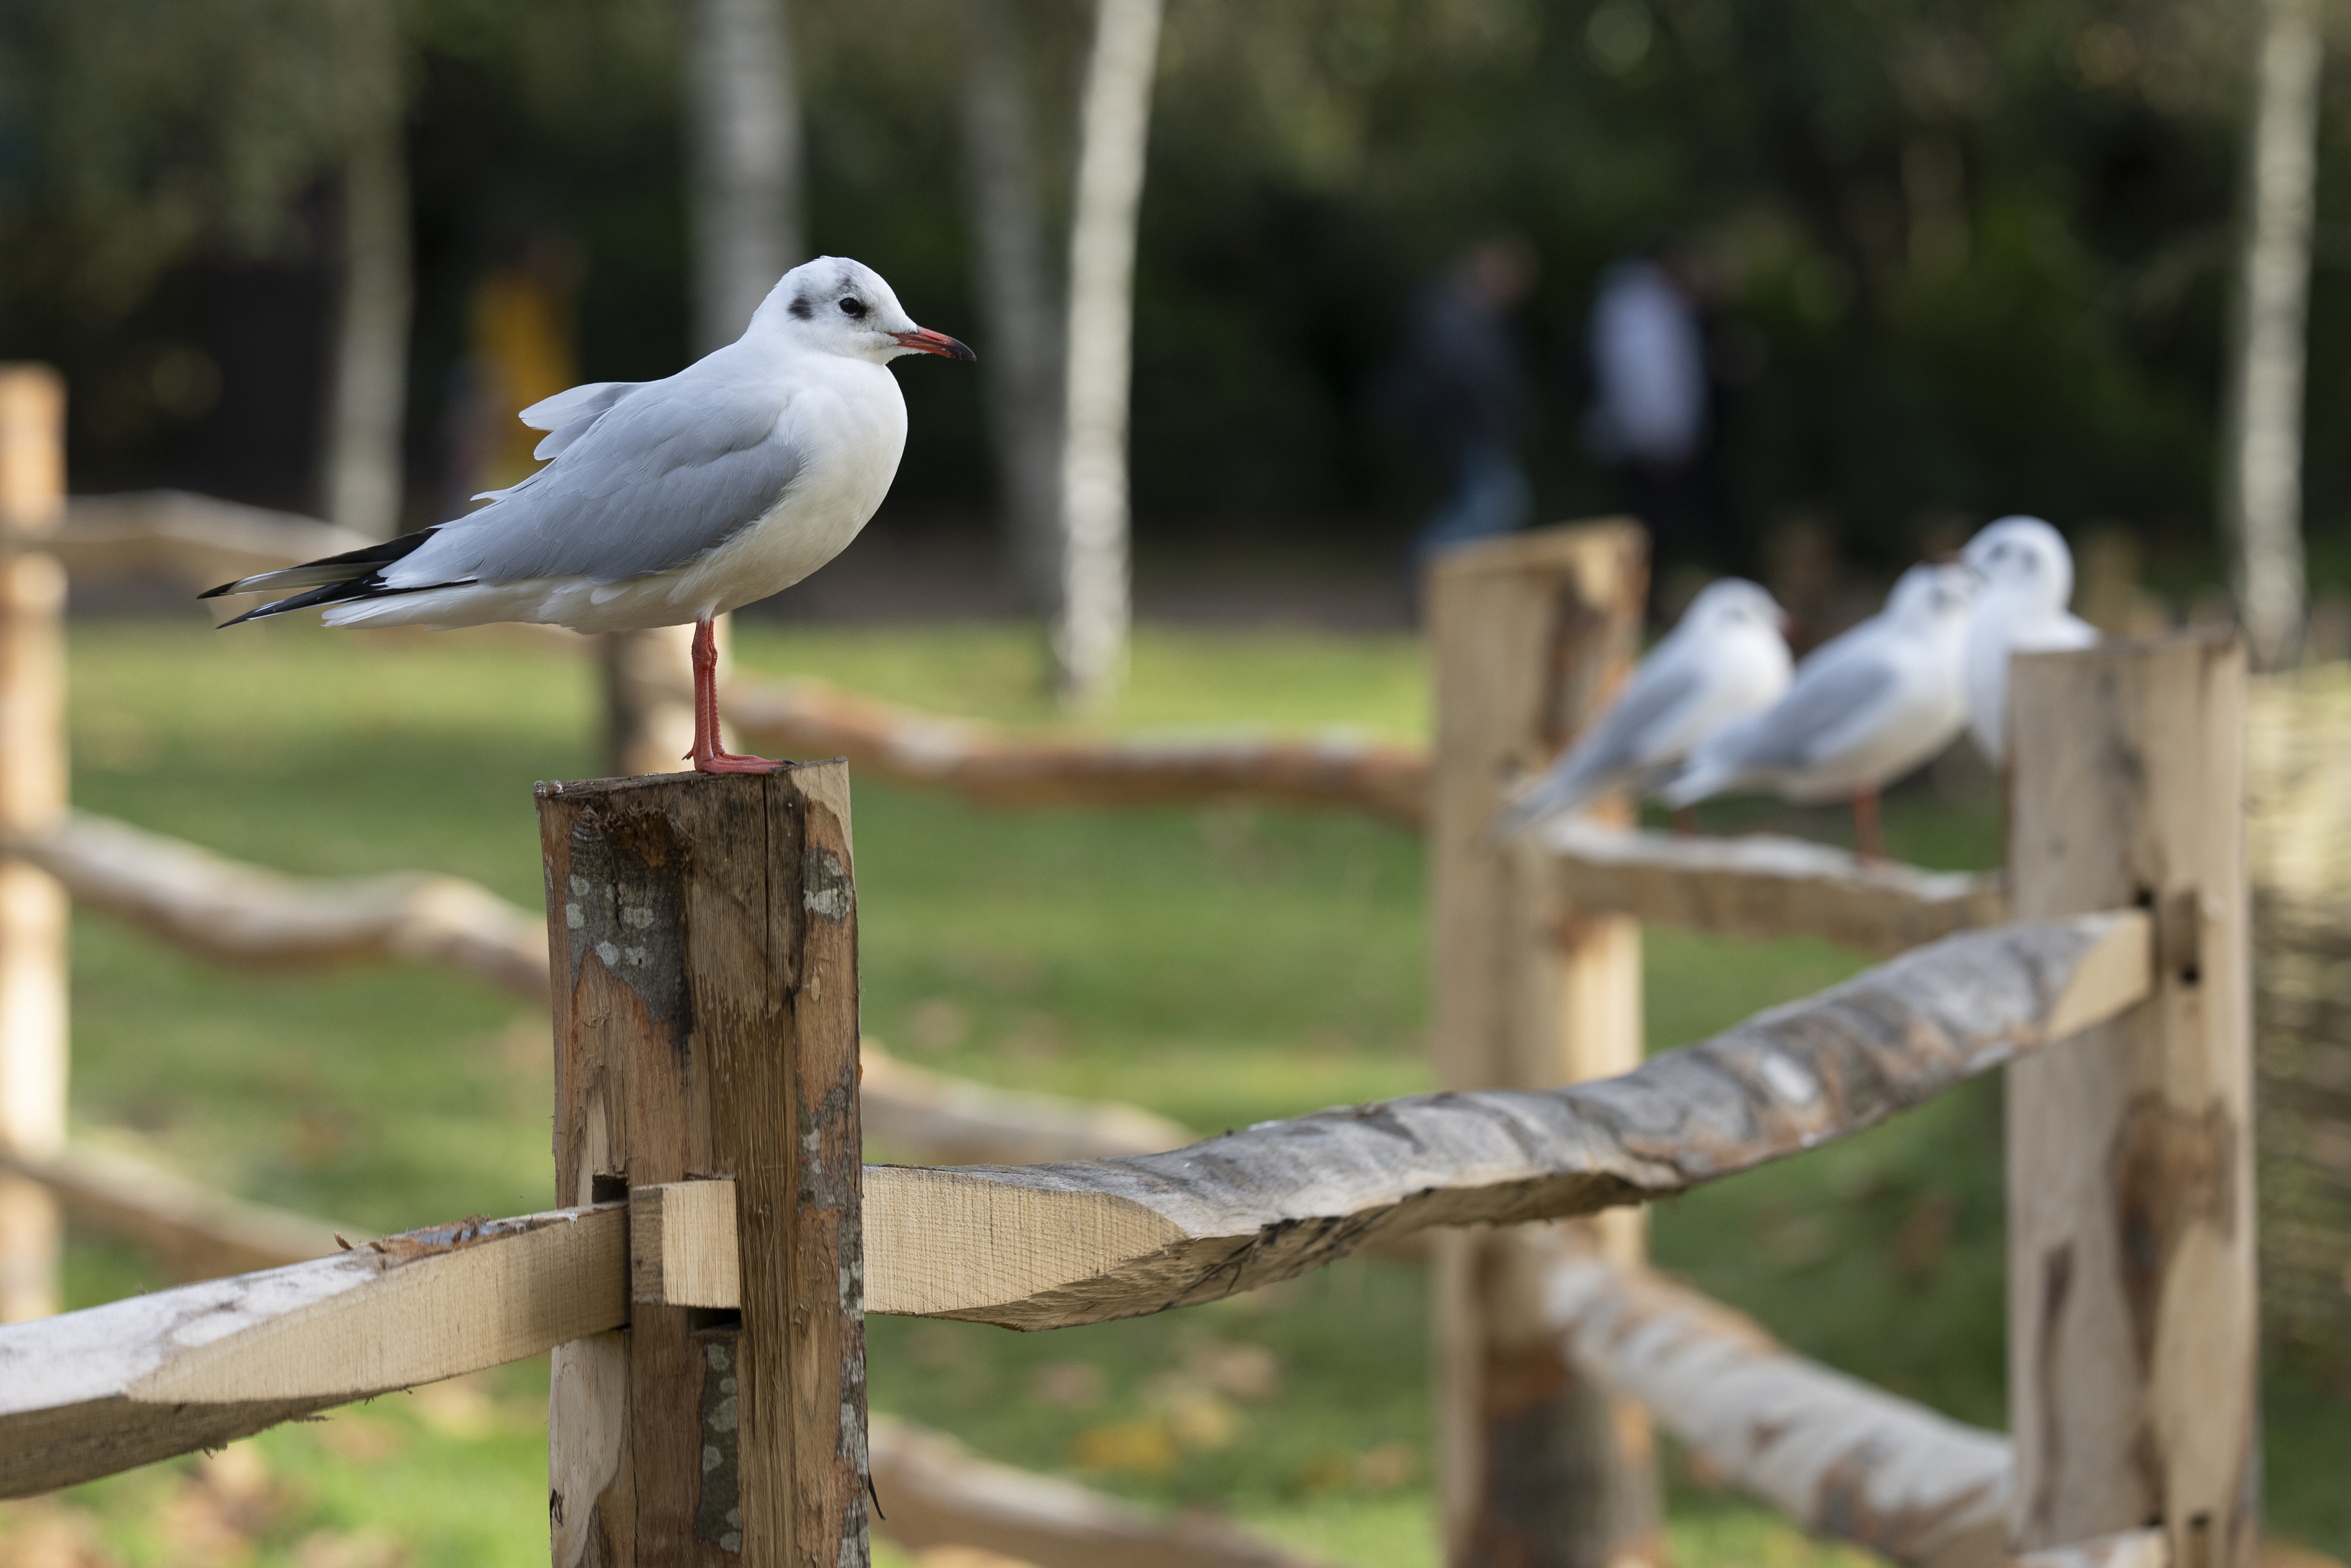 A bird perched on a fence post